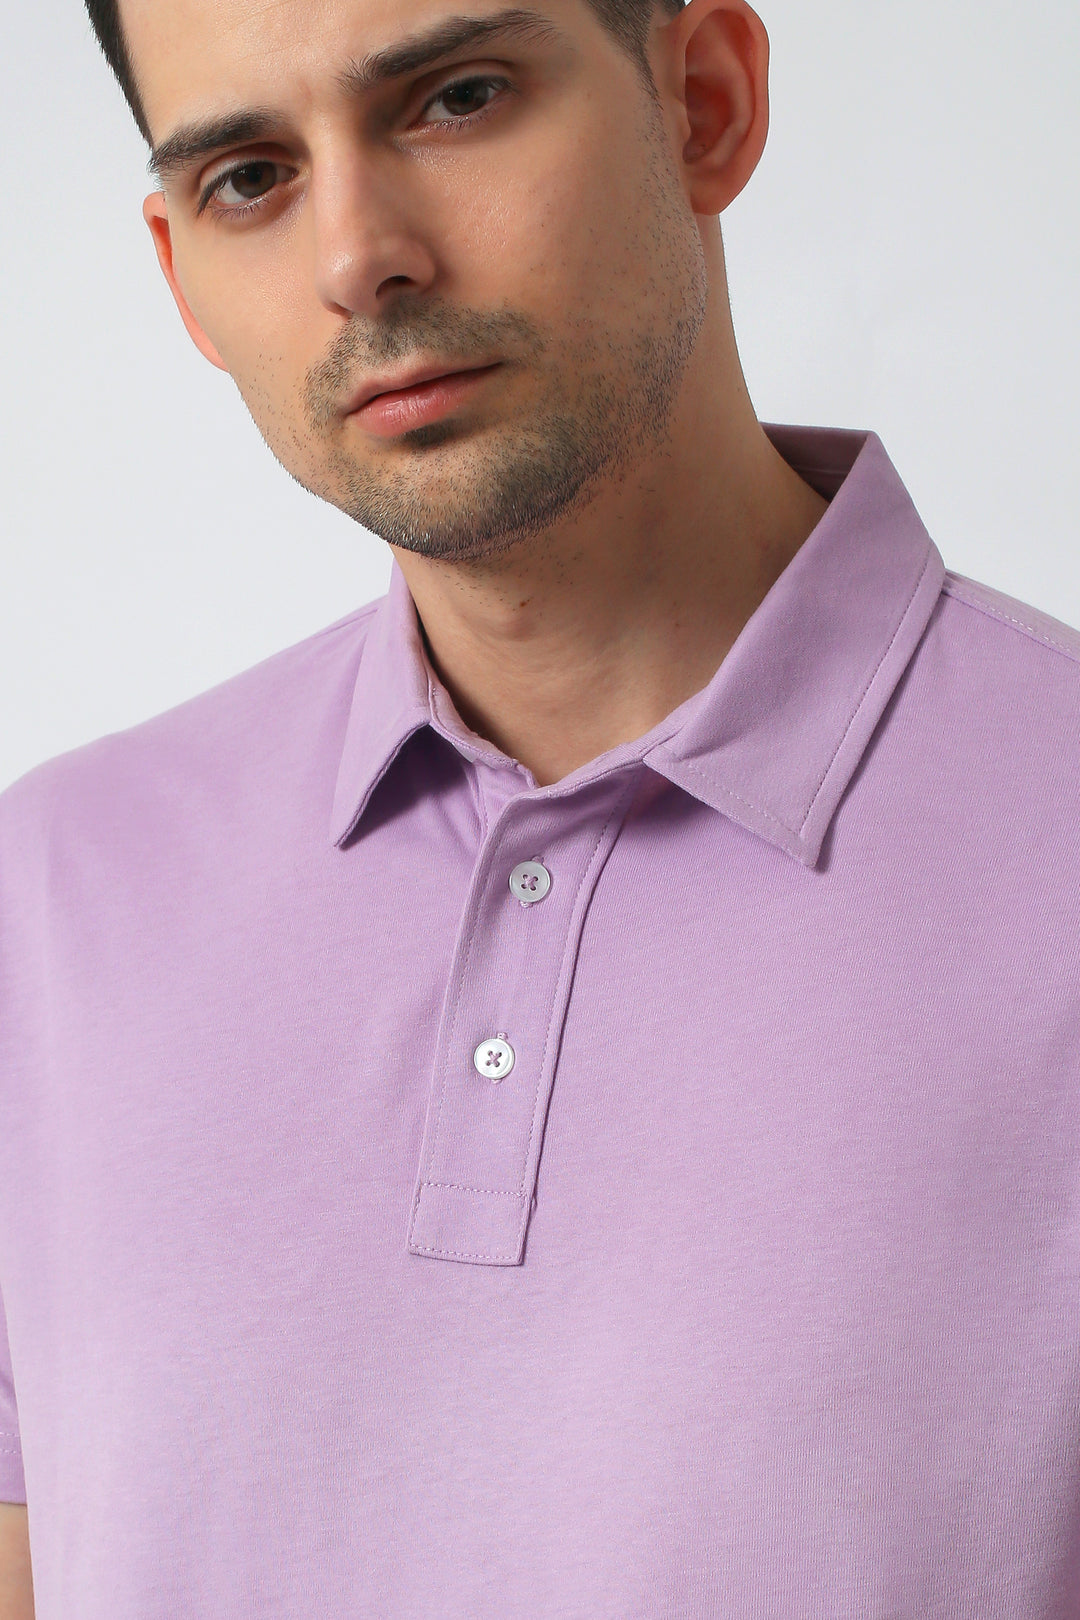 Lavender Love: How to Style A Lavender Everyday Polo Shirt from Romeo NYC